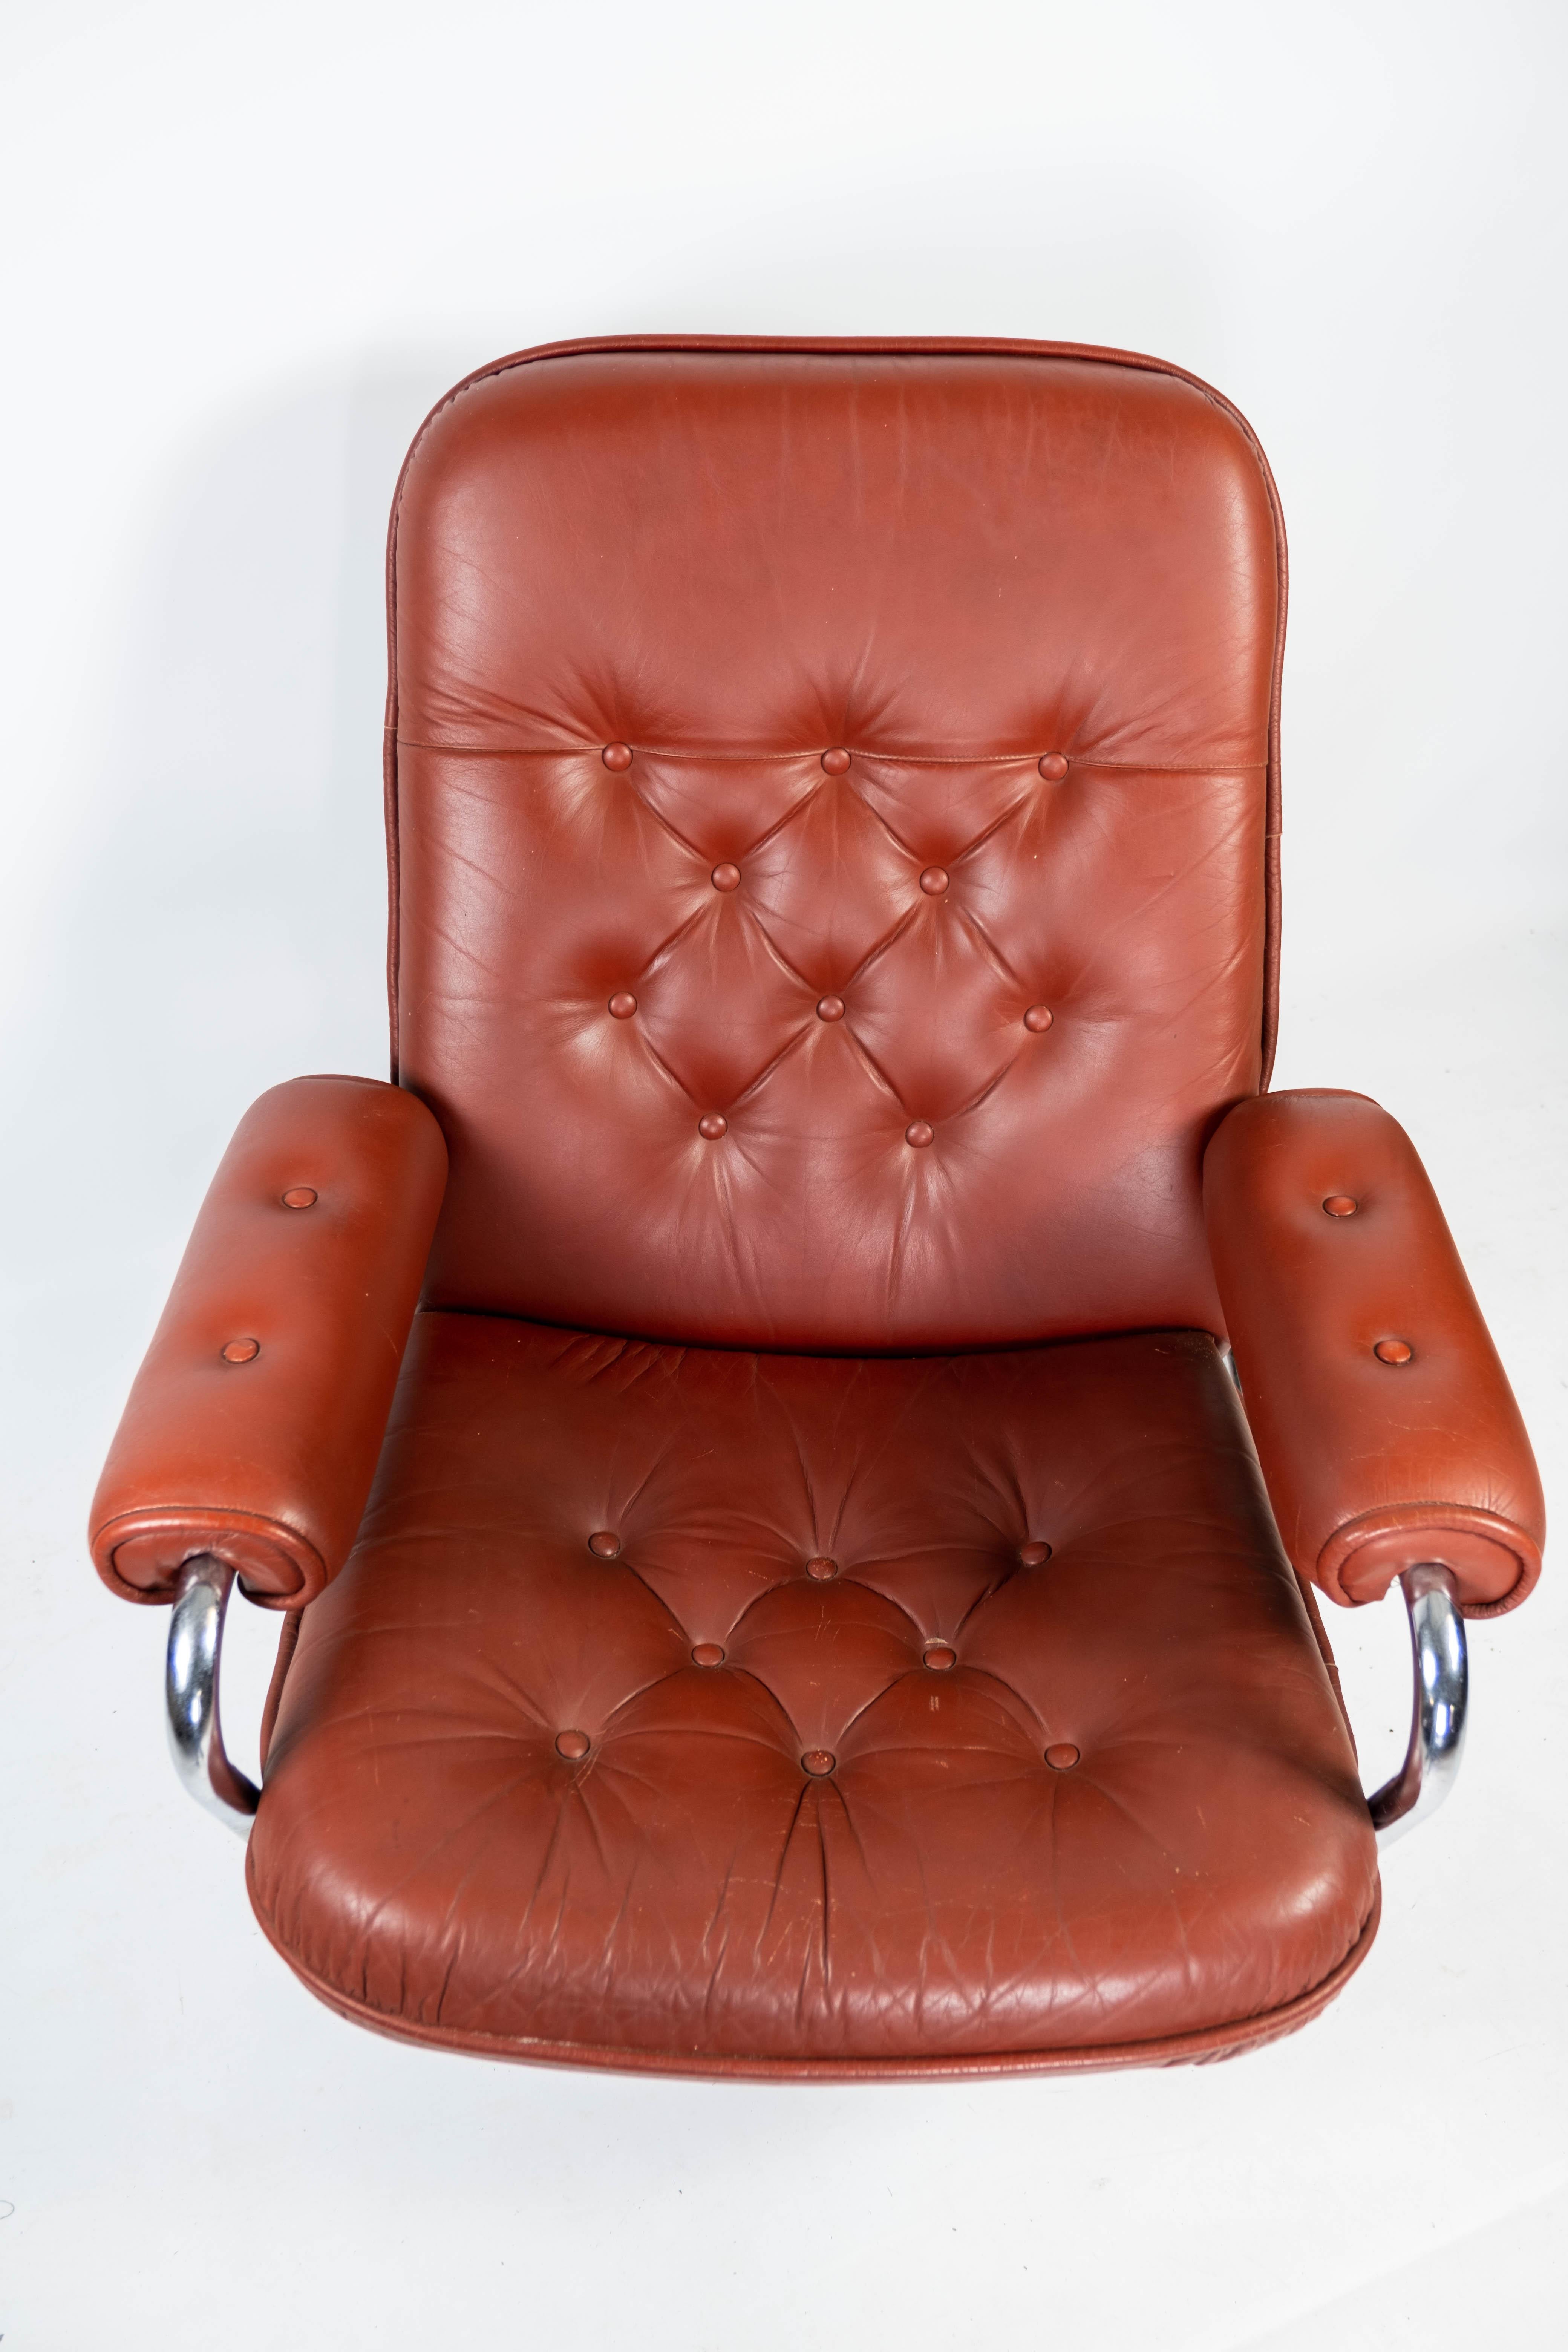 Armchair Upholstered with Red Leather and Frame of Metal, of Danish Design, 1960 For Sale 2